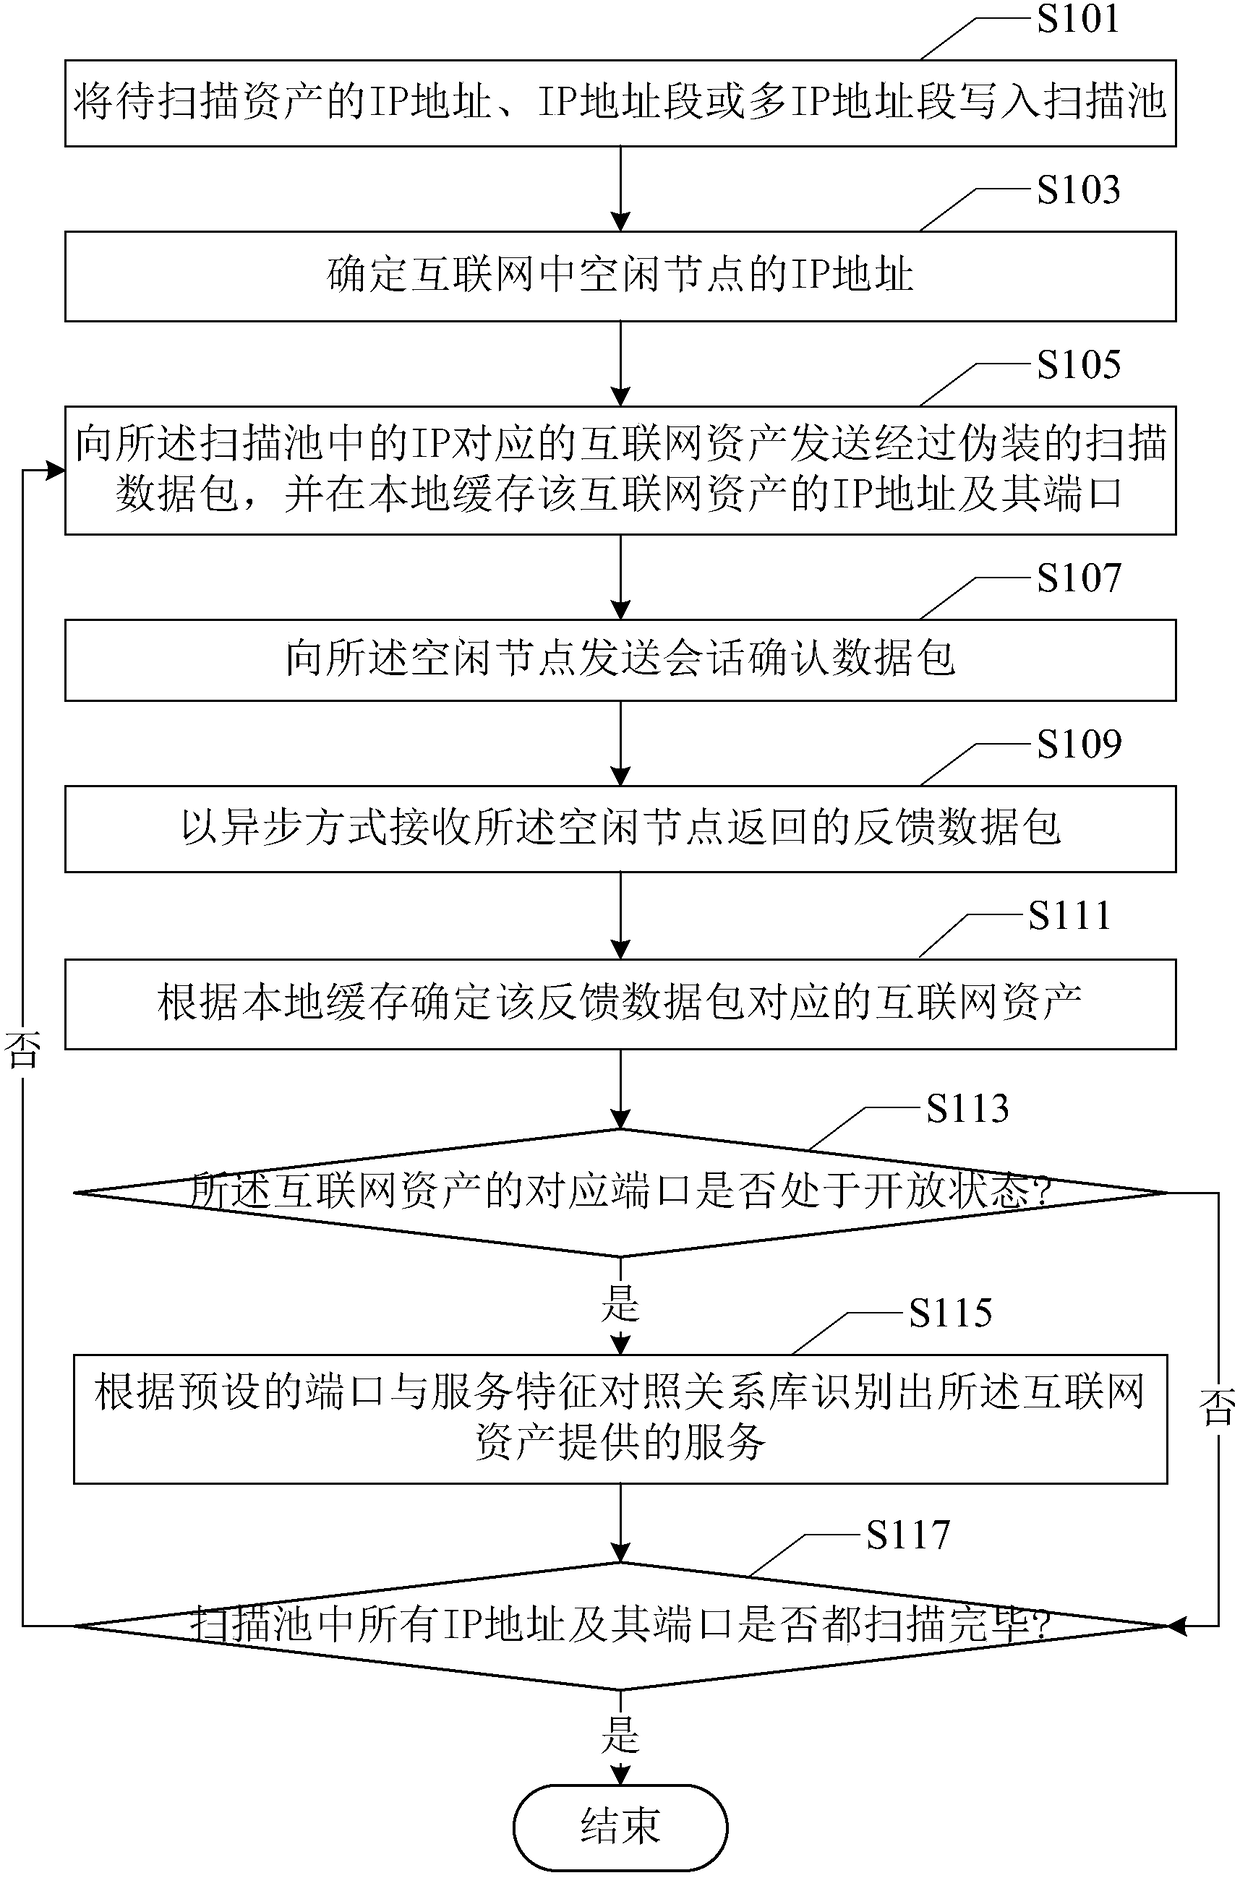 Method and apparatus for internet asset scanning discovery and service identification